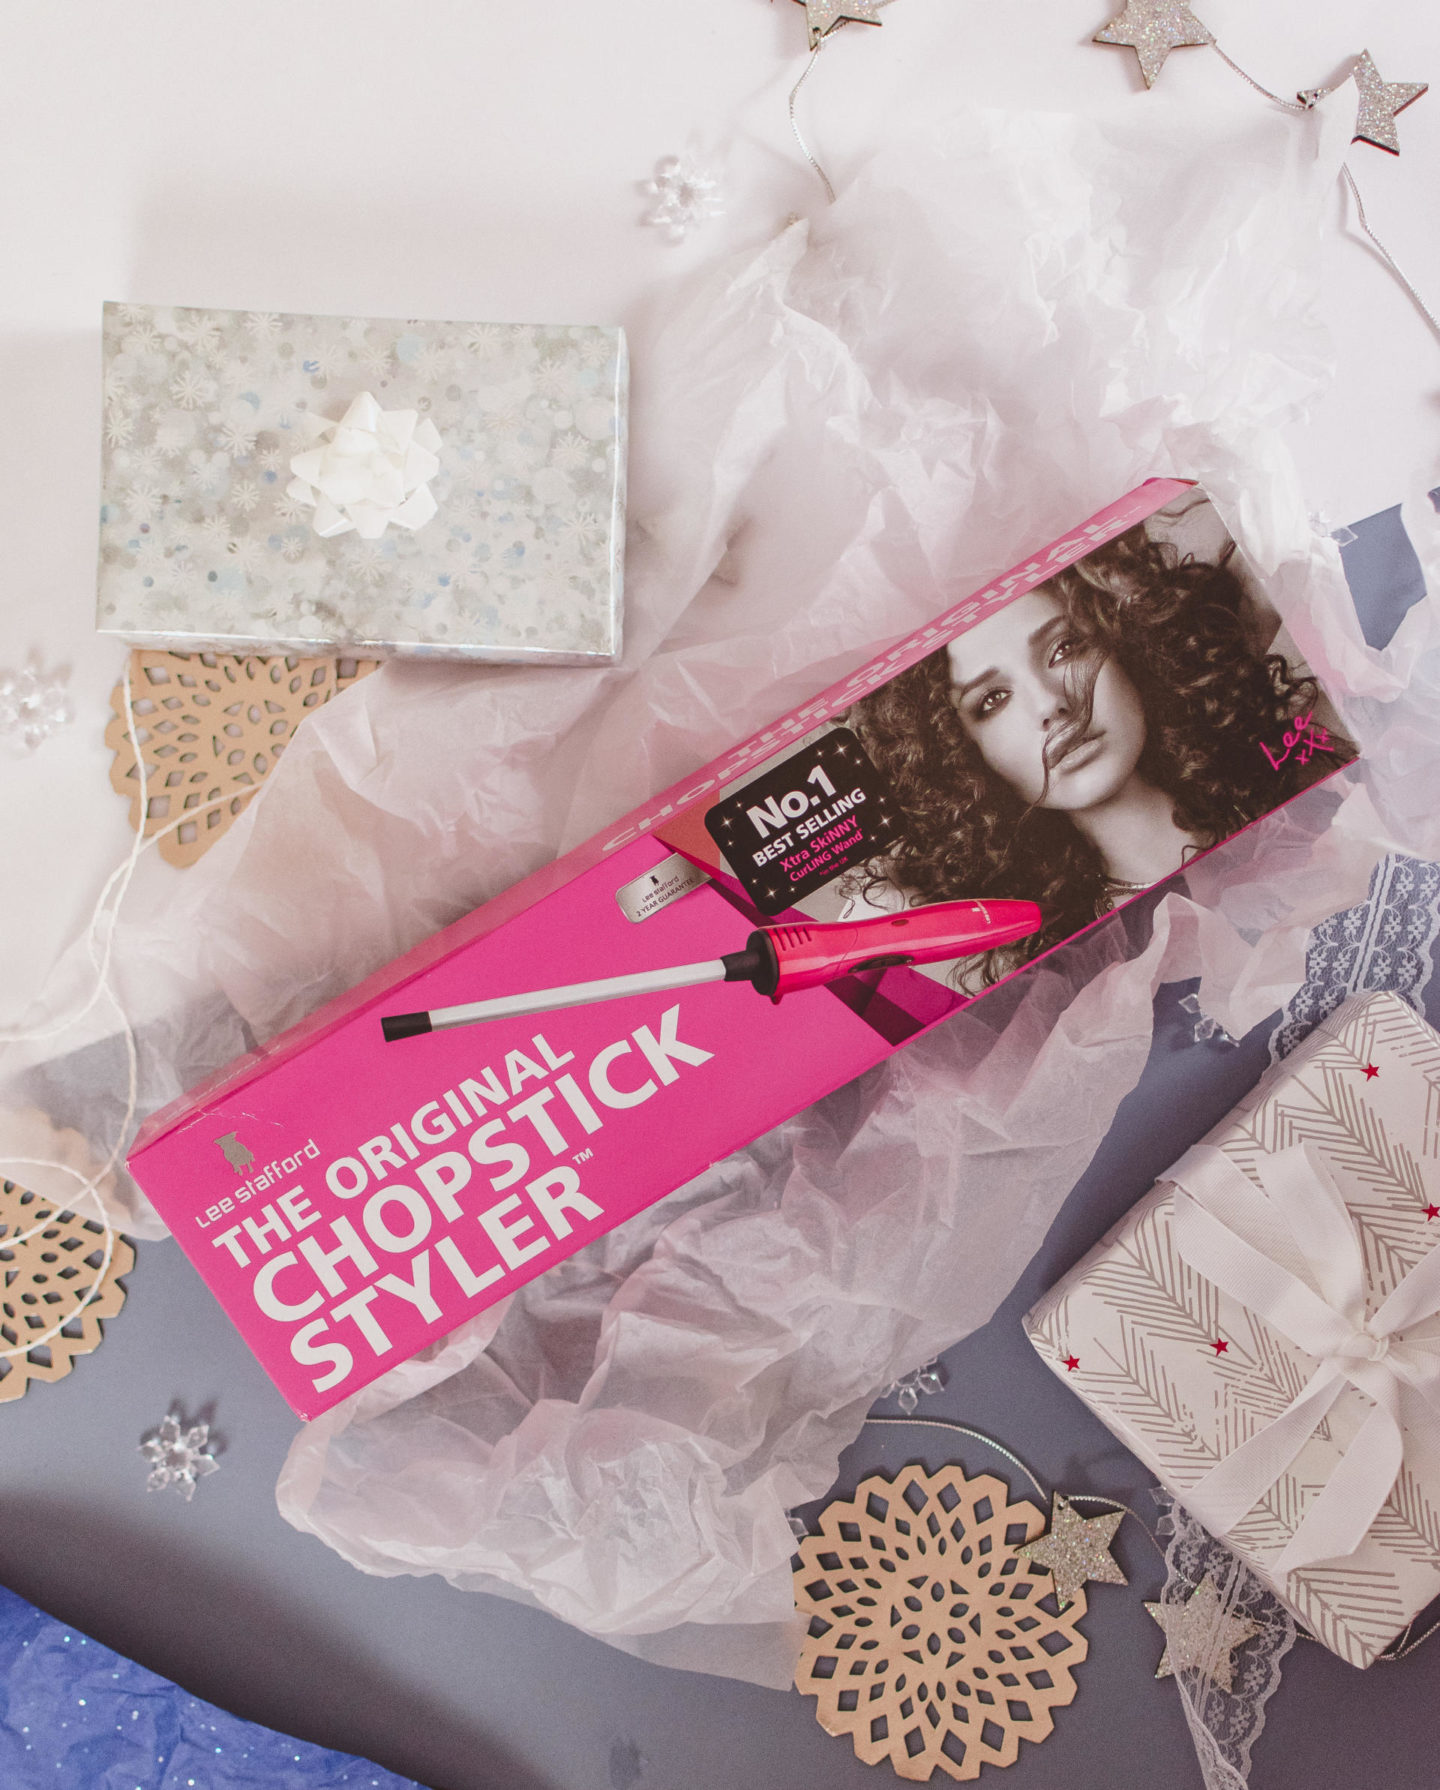 Lee Stafford The Original Chopstick Styler Curling Wand Gift Guide